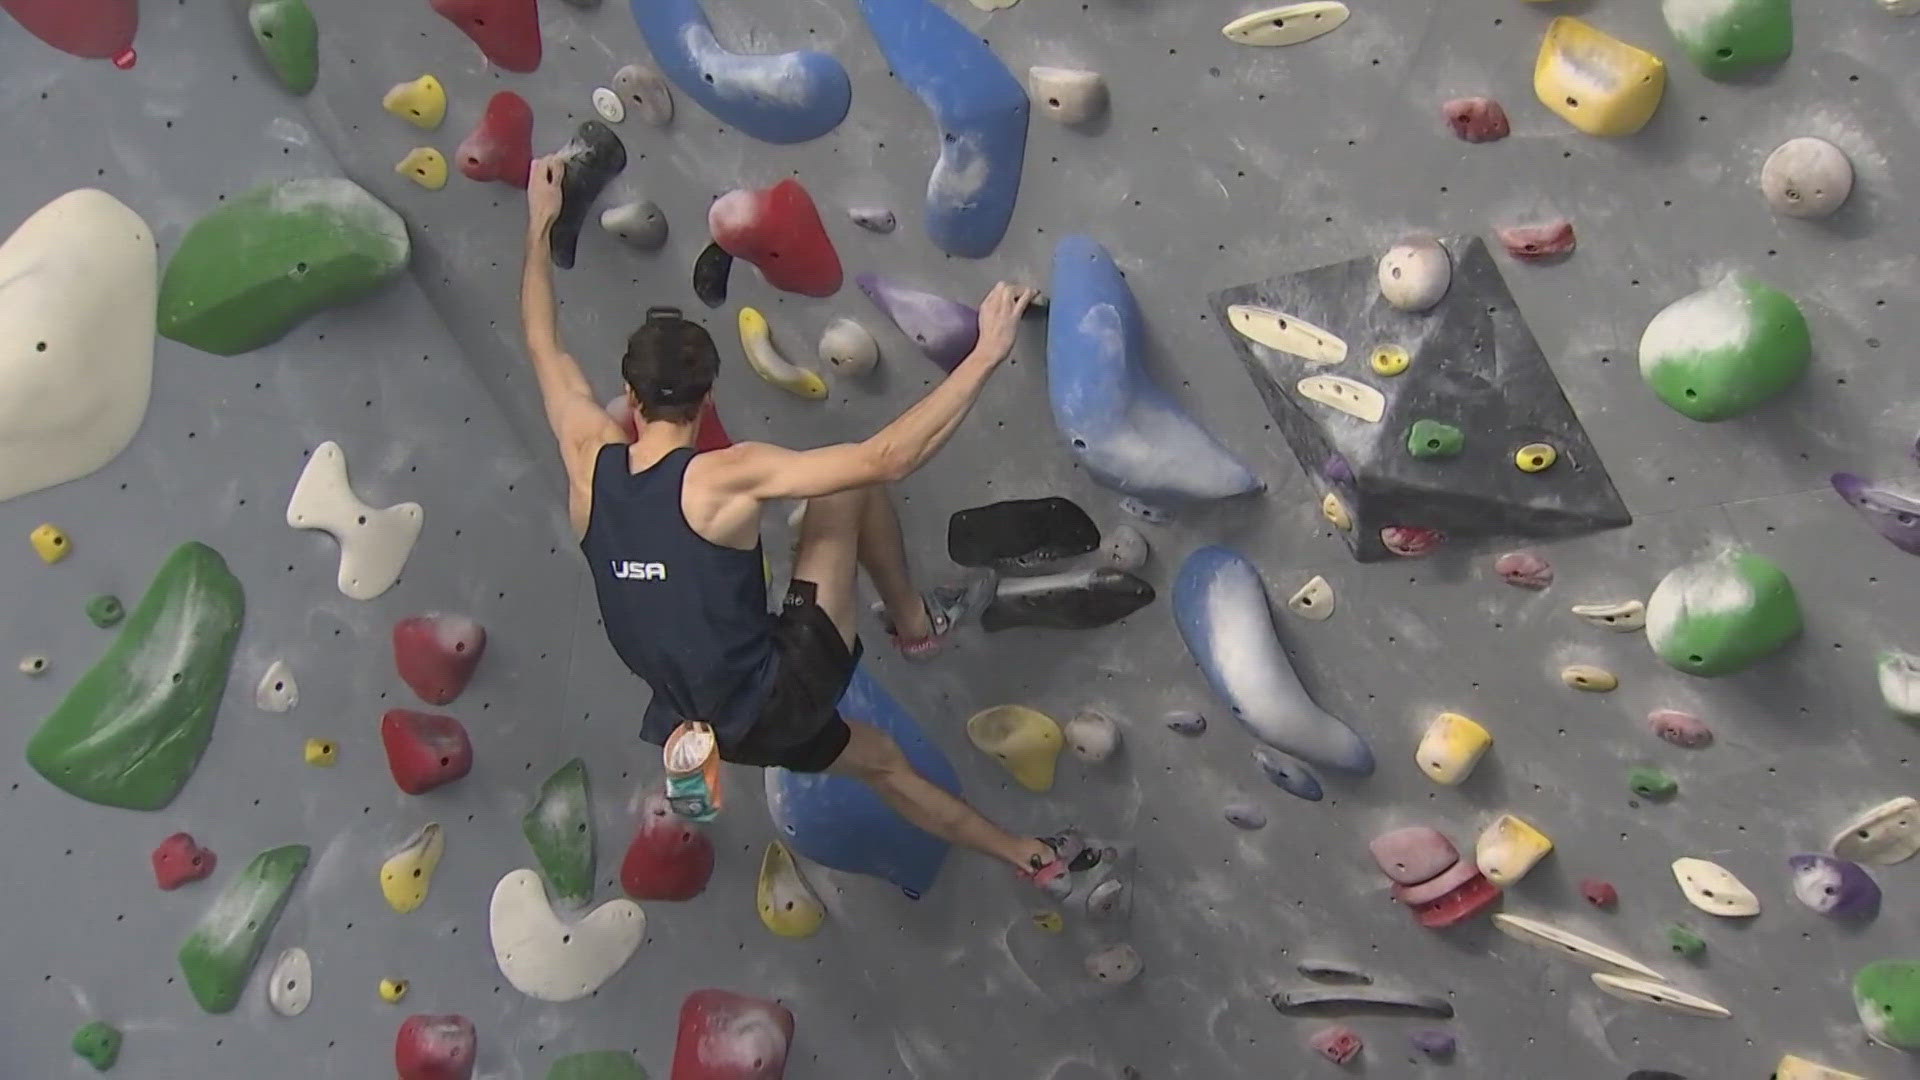 New Jersey native Jesse Grupper started sport climbing at the age of 6, and he has now qualified for the Paris Olympics.